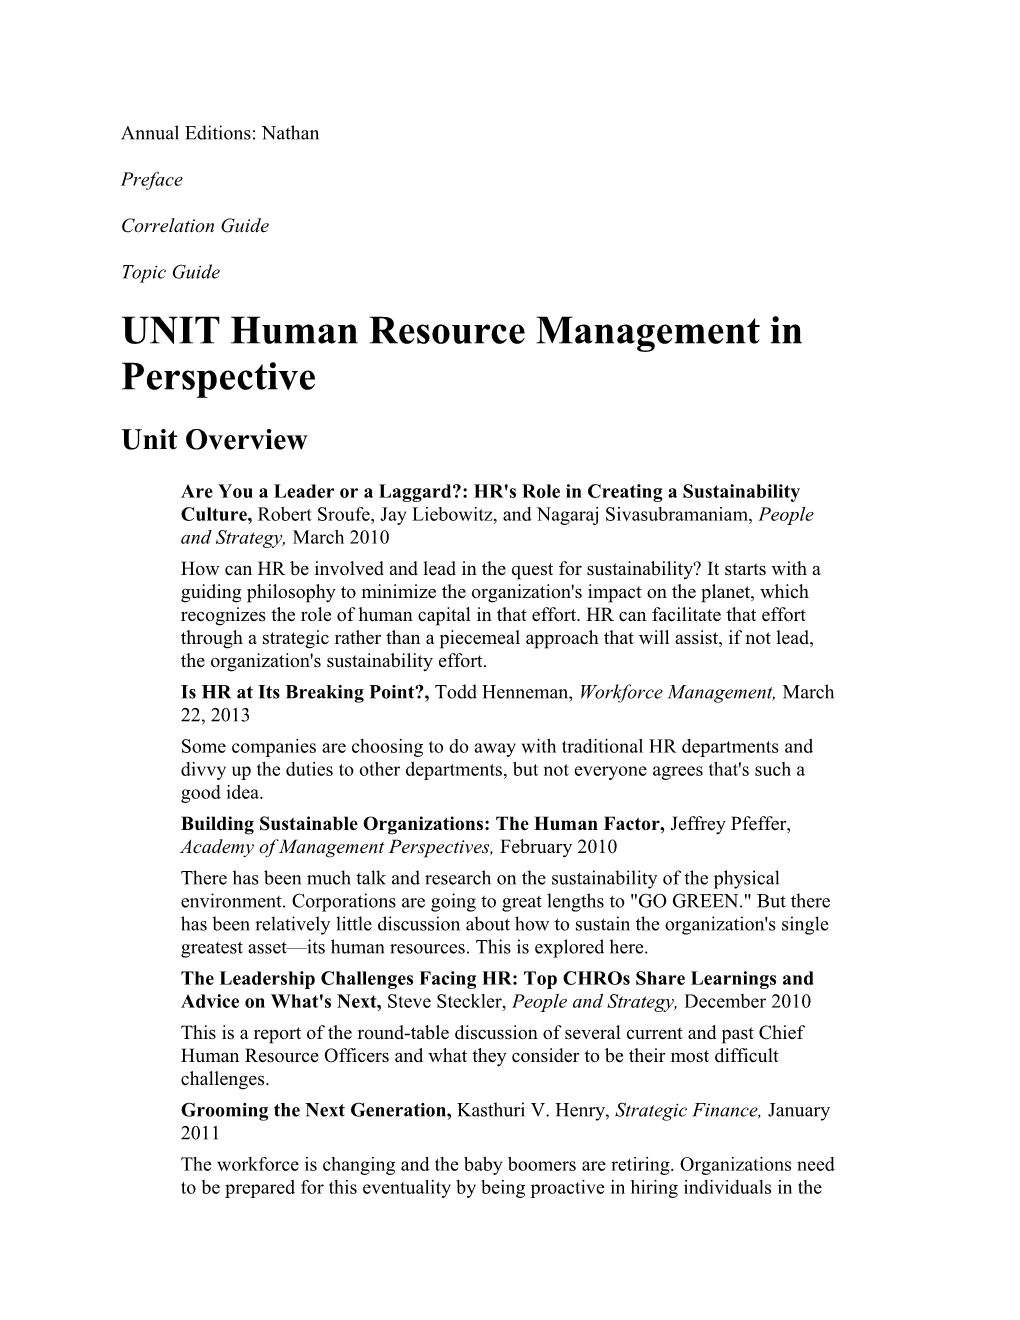 UNIT Human Resource Management in Perspective